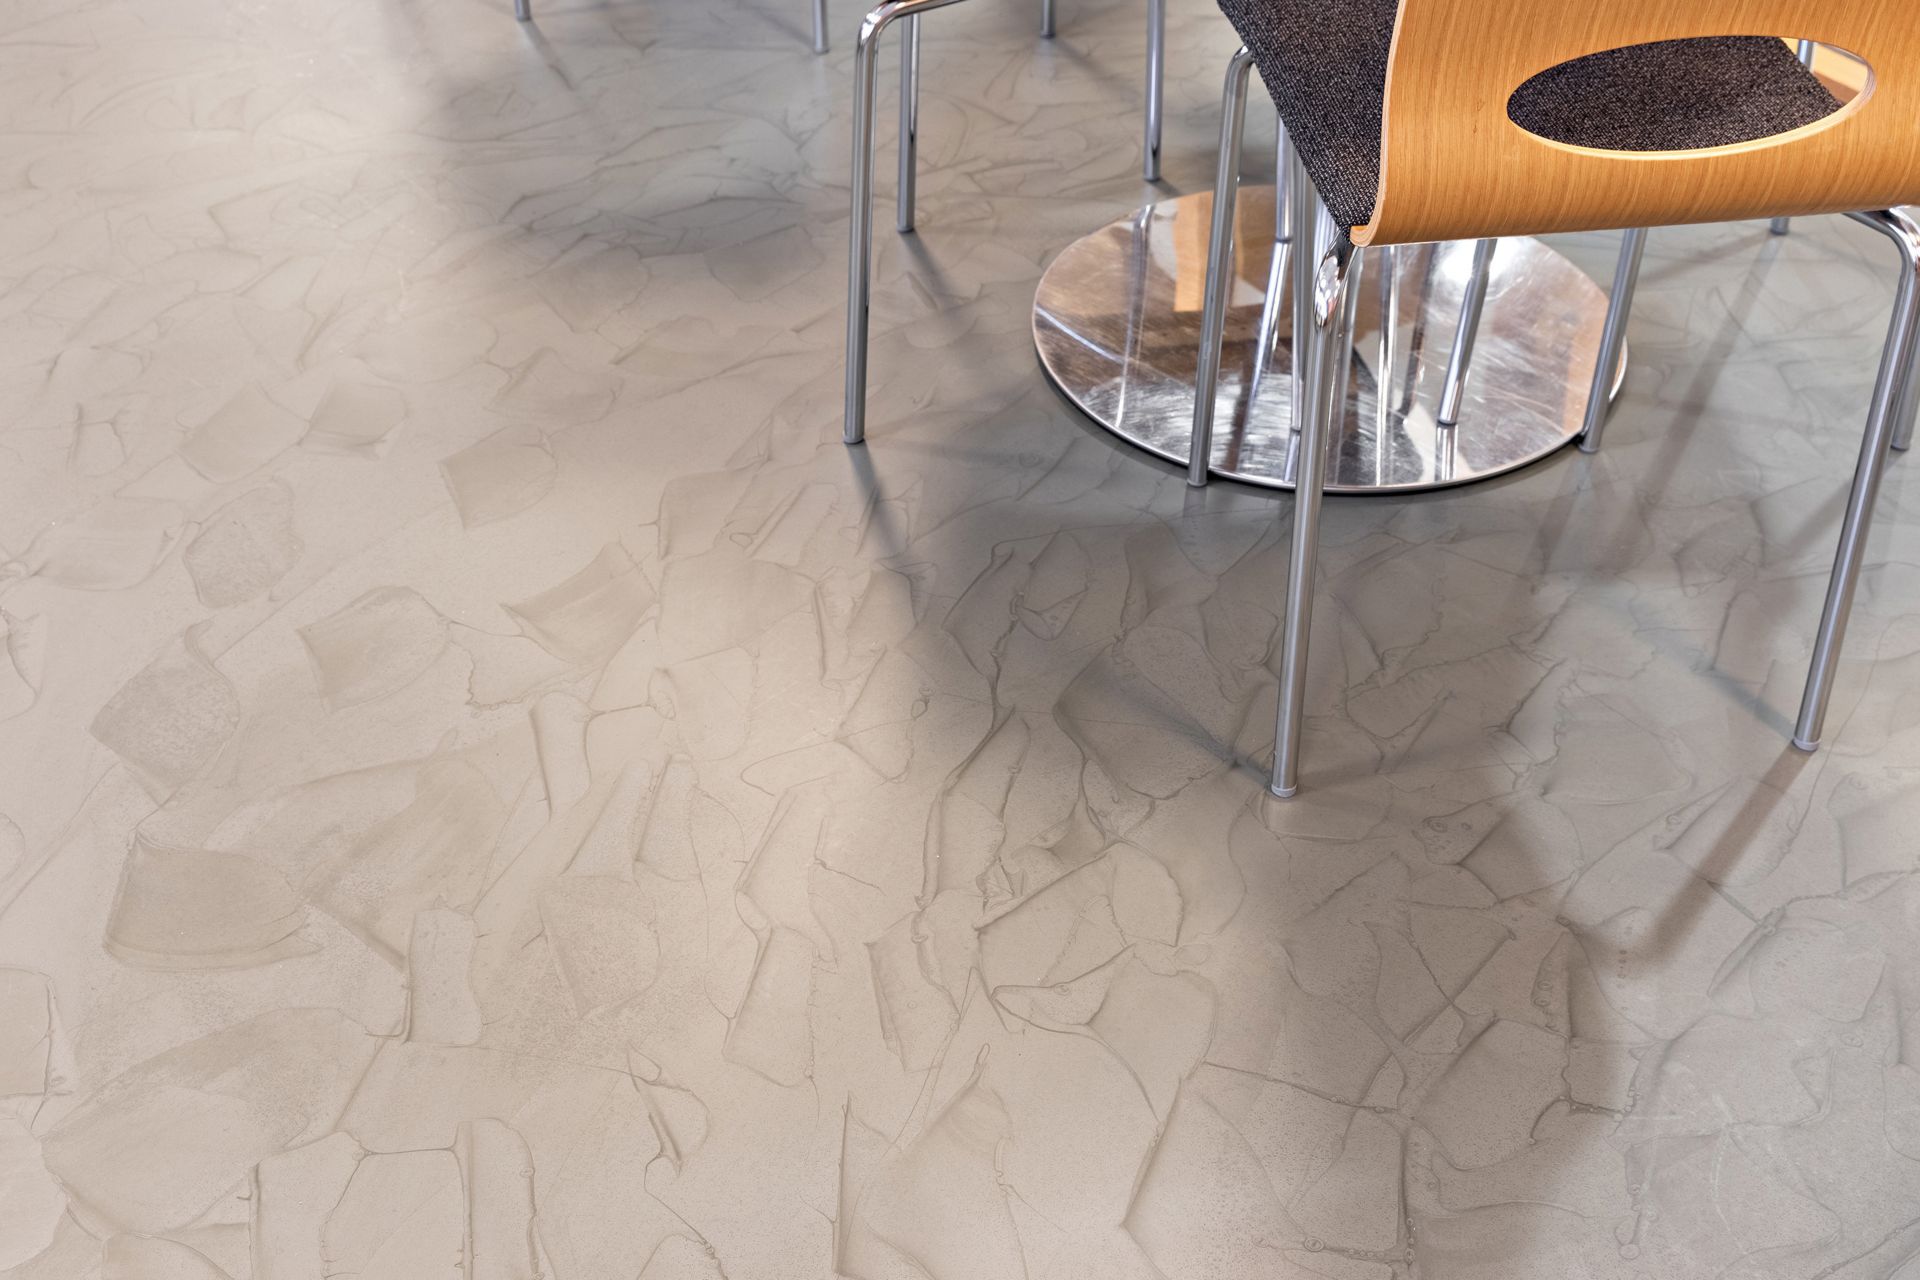 Sika ComforFloor in the canteen and  break rooms of the Oulu City Hall in Finland 